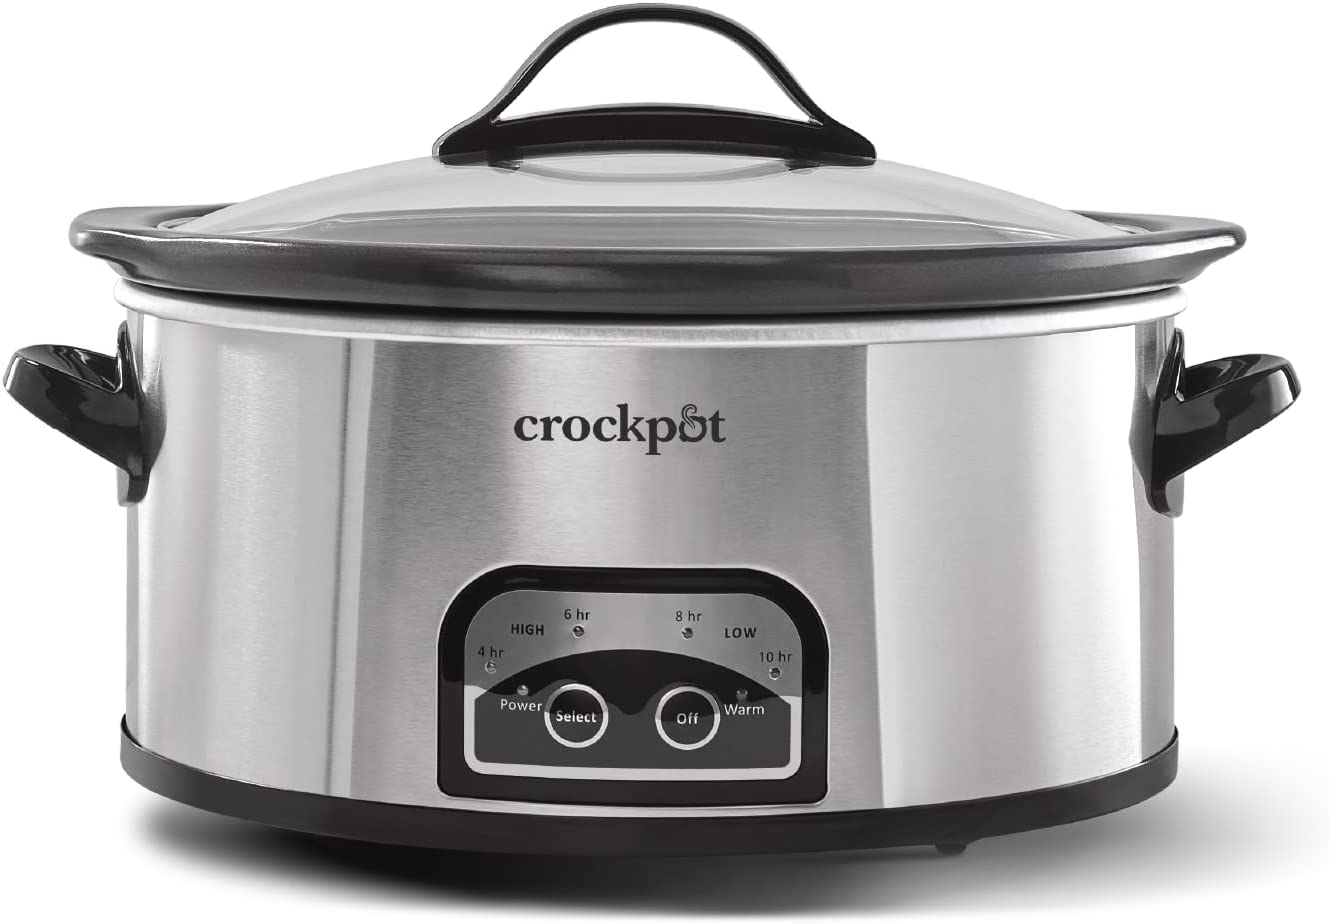 https://bigbigmart.com/wp-content/uploads/2023/03/Crock-Pot-6-Quart-Slow-Cooker-with-Auto-Warm-Setting-and-Programmable-Controls-Stainless-Steel.jpg